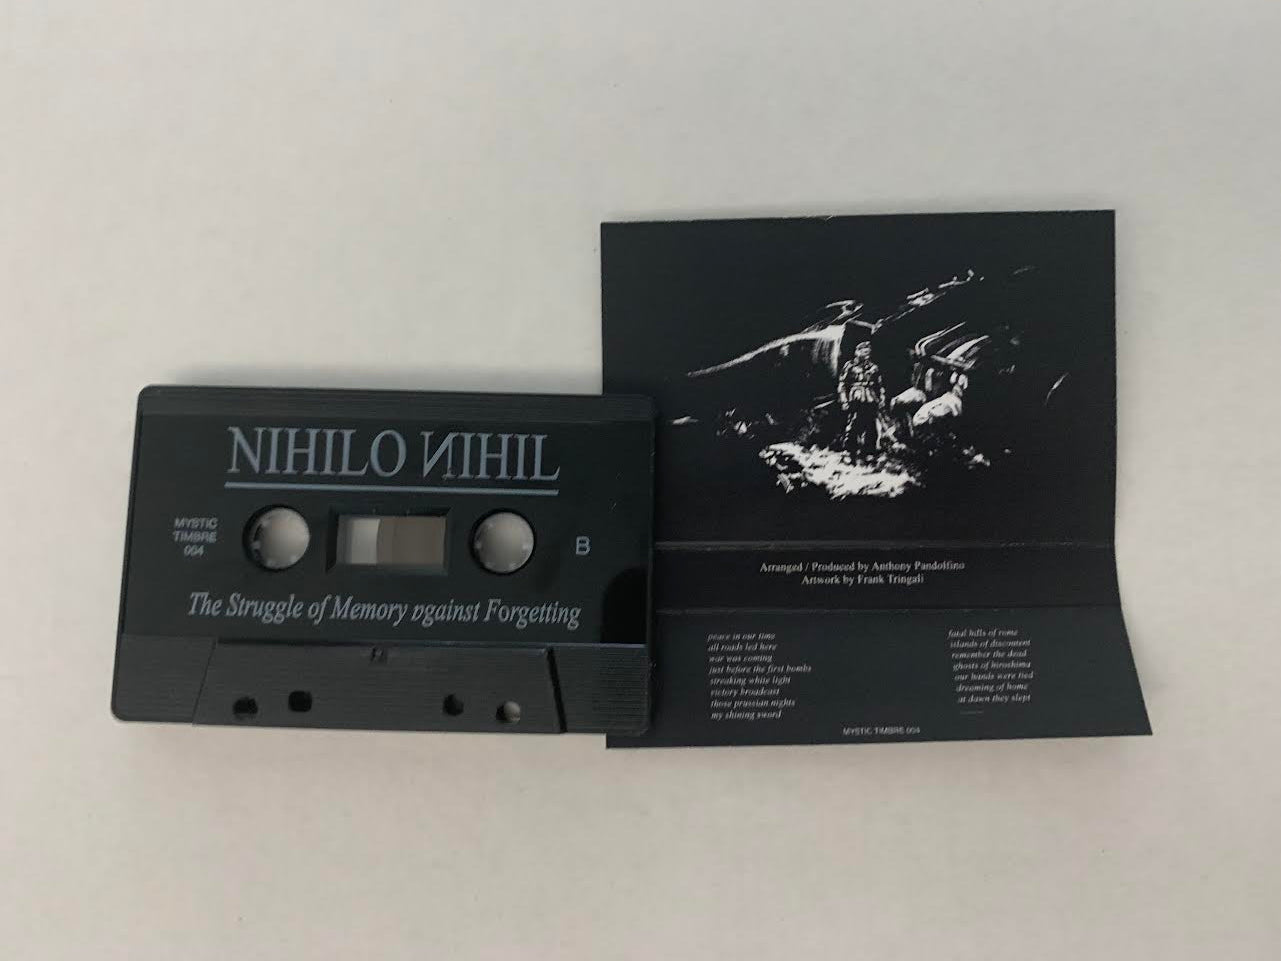 Nihilo Nihil - Struggle of Memory against Forgetting, The [Sound Collage] (Mystic Timbre - Tape - 4/20/19)